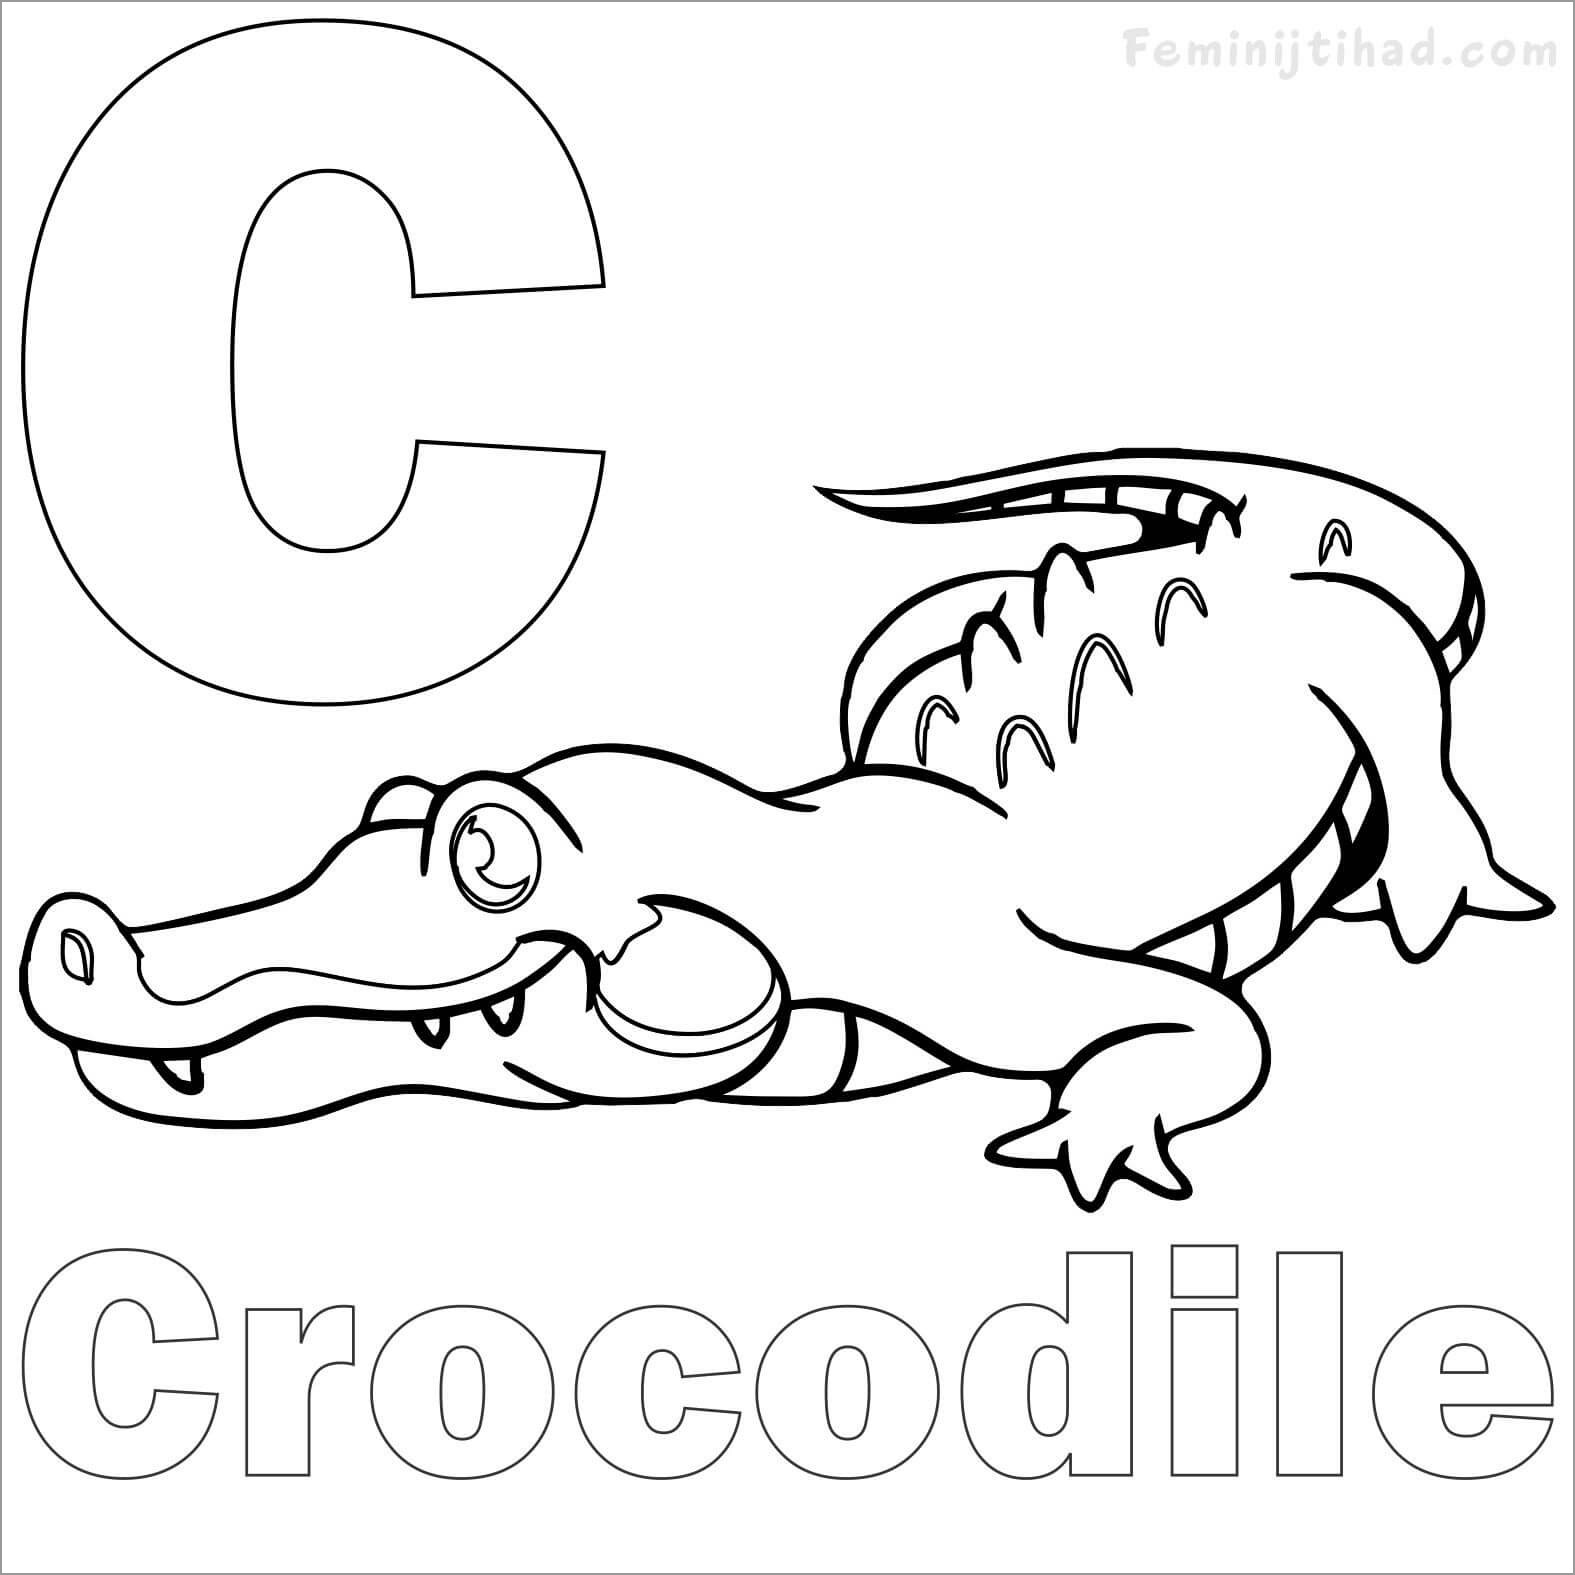 Crocodile Coloring Pages - ColoringBay